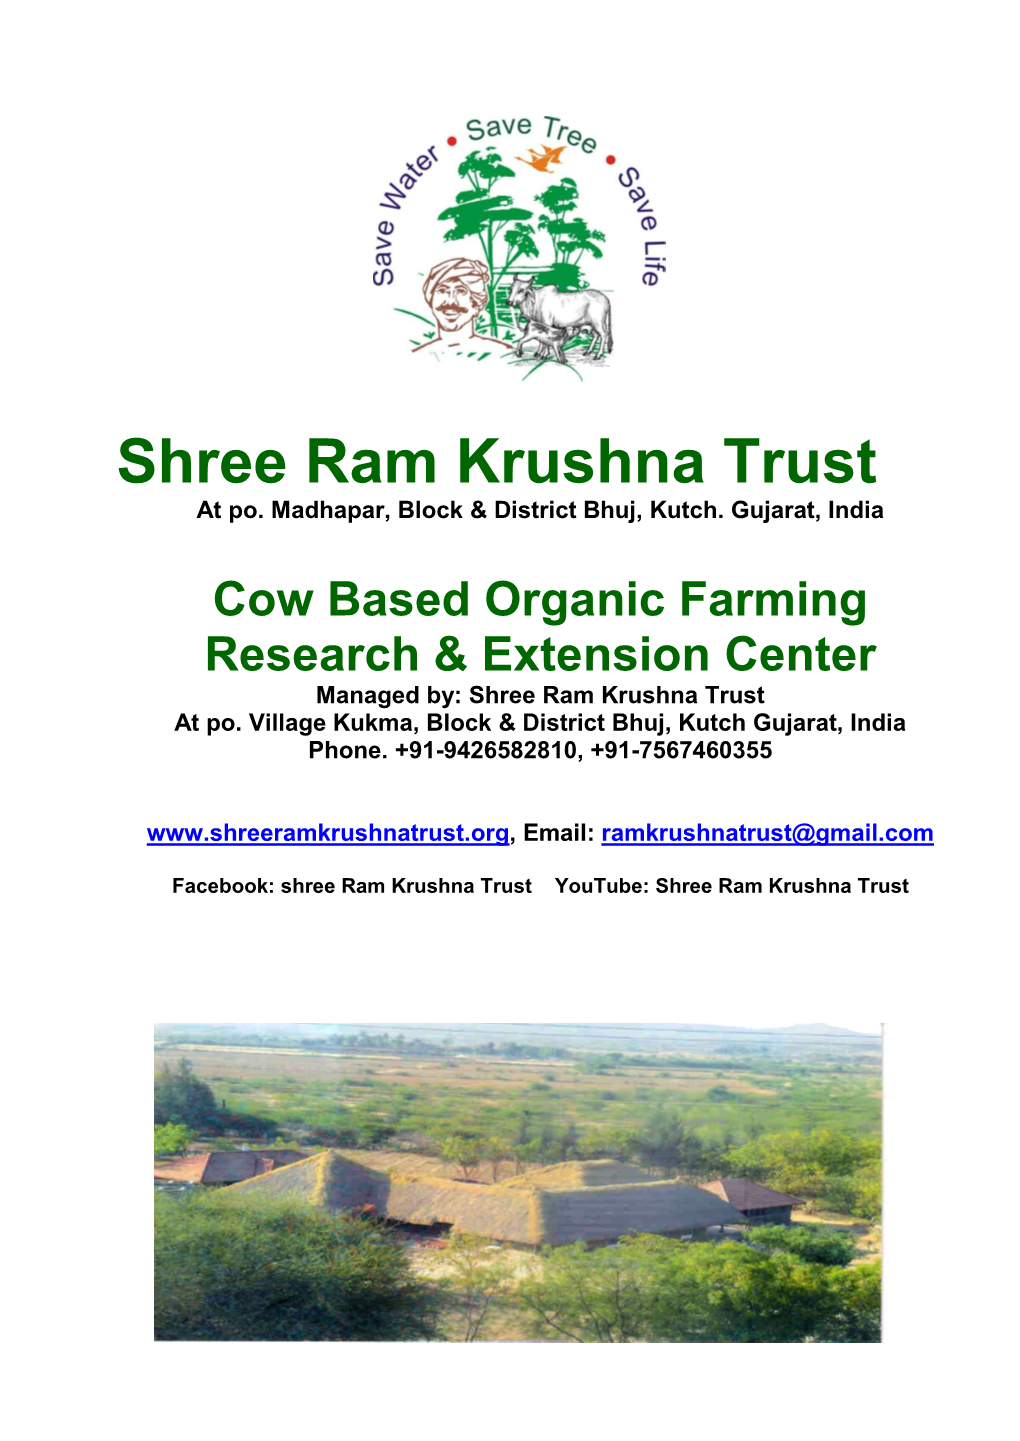 Cow Based Organic Farming Research & Extension Center